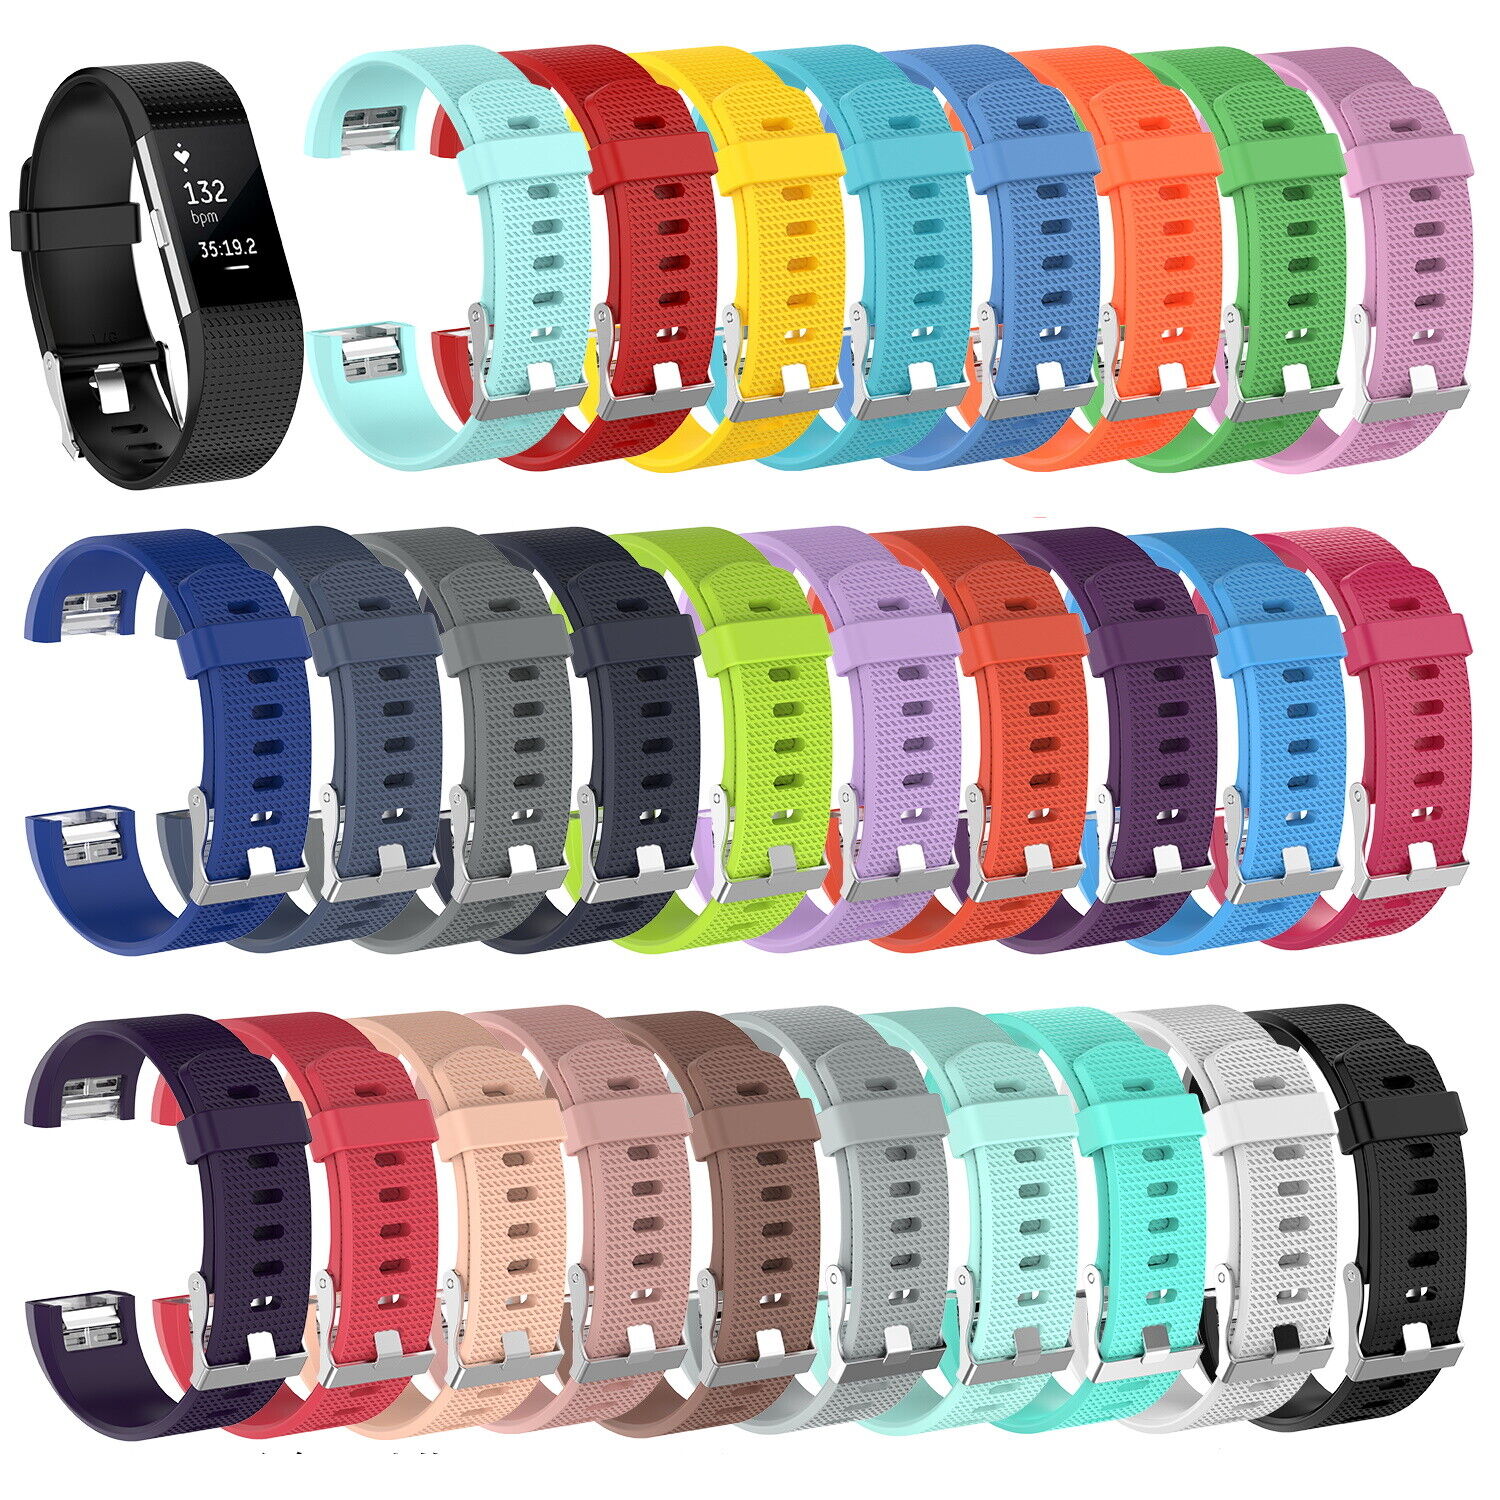 Replacement Silicone Rubber Band Strap Wristband Bracelet For Fitbit CHARGE 2 Unbranded 870012